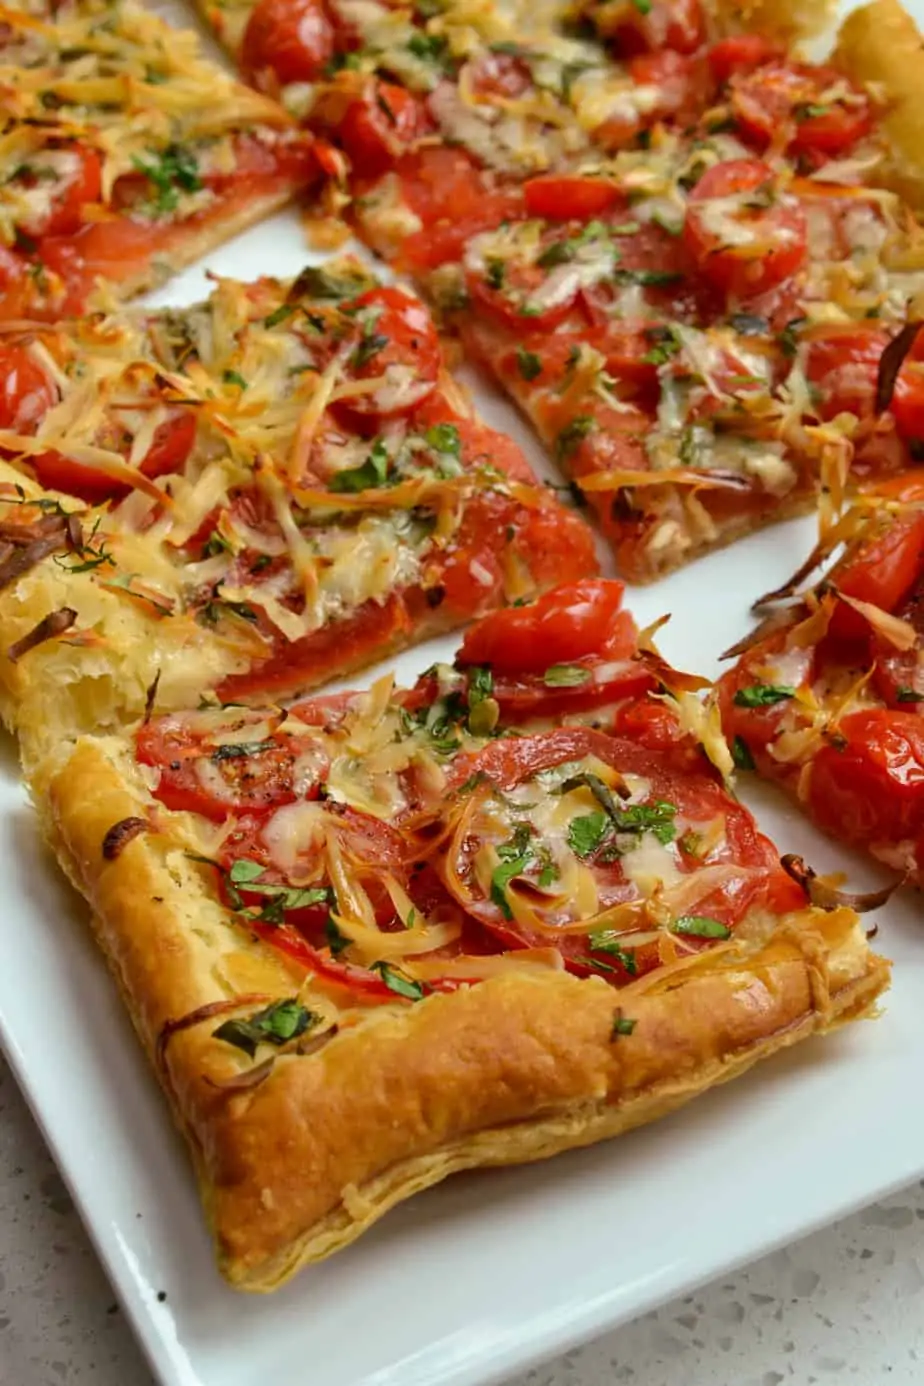 Tomato Tart is made easily with frozen puff pastry, garden fresh tomatoes, fresh herbs, mozzarella, cheddar, and gruyere cheese. 